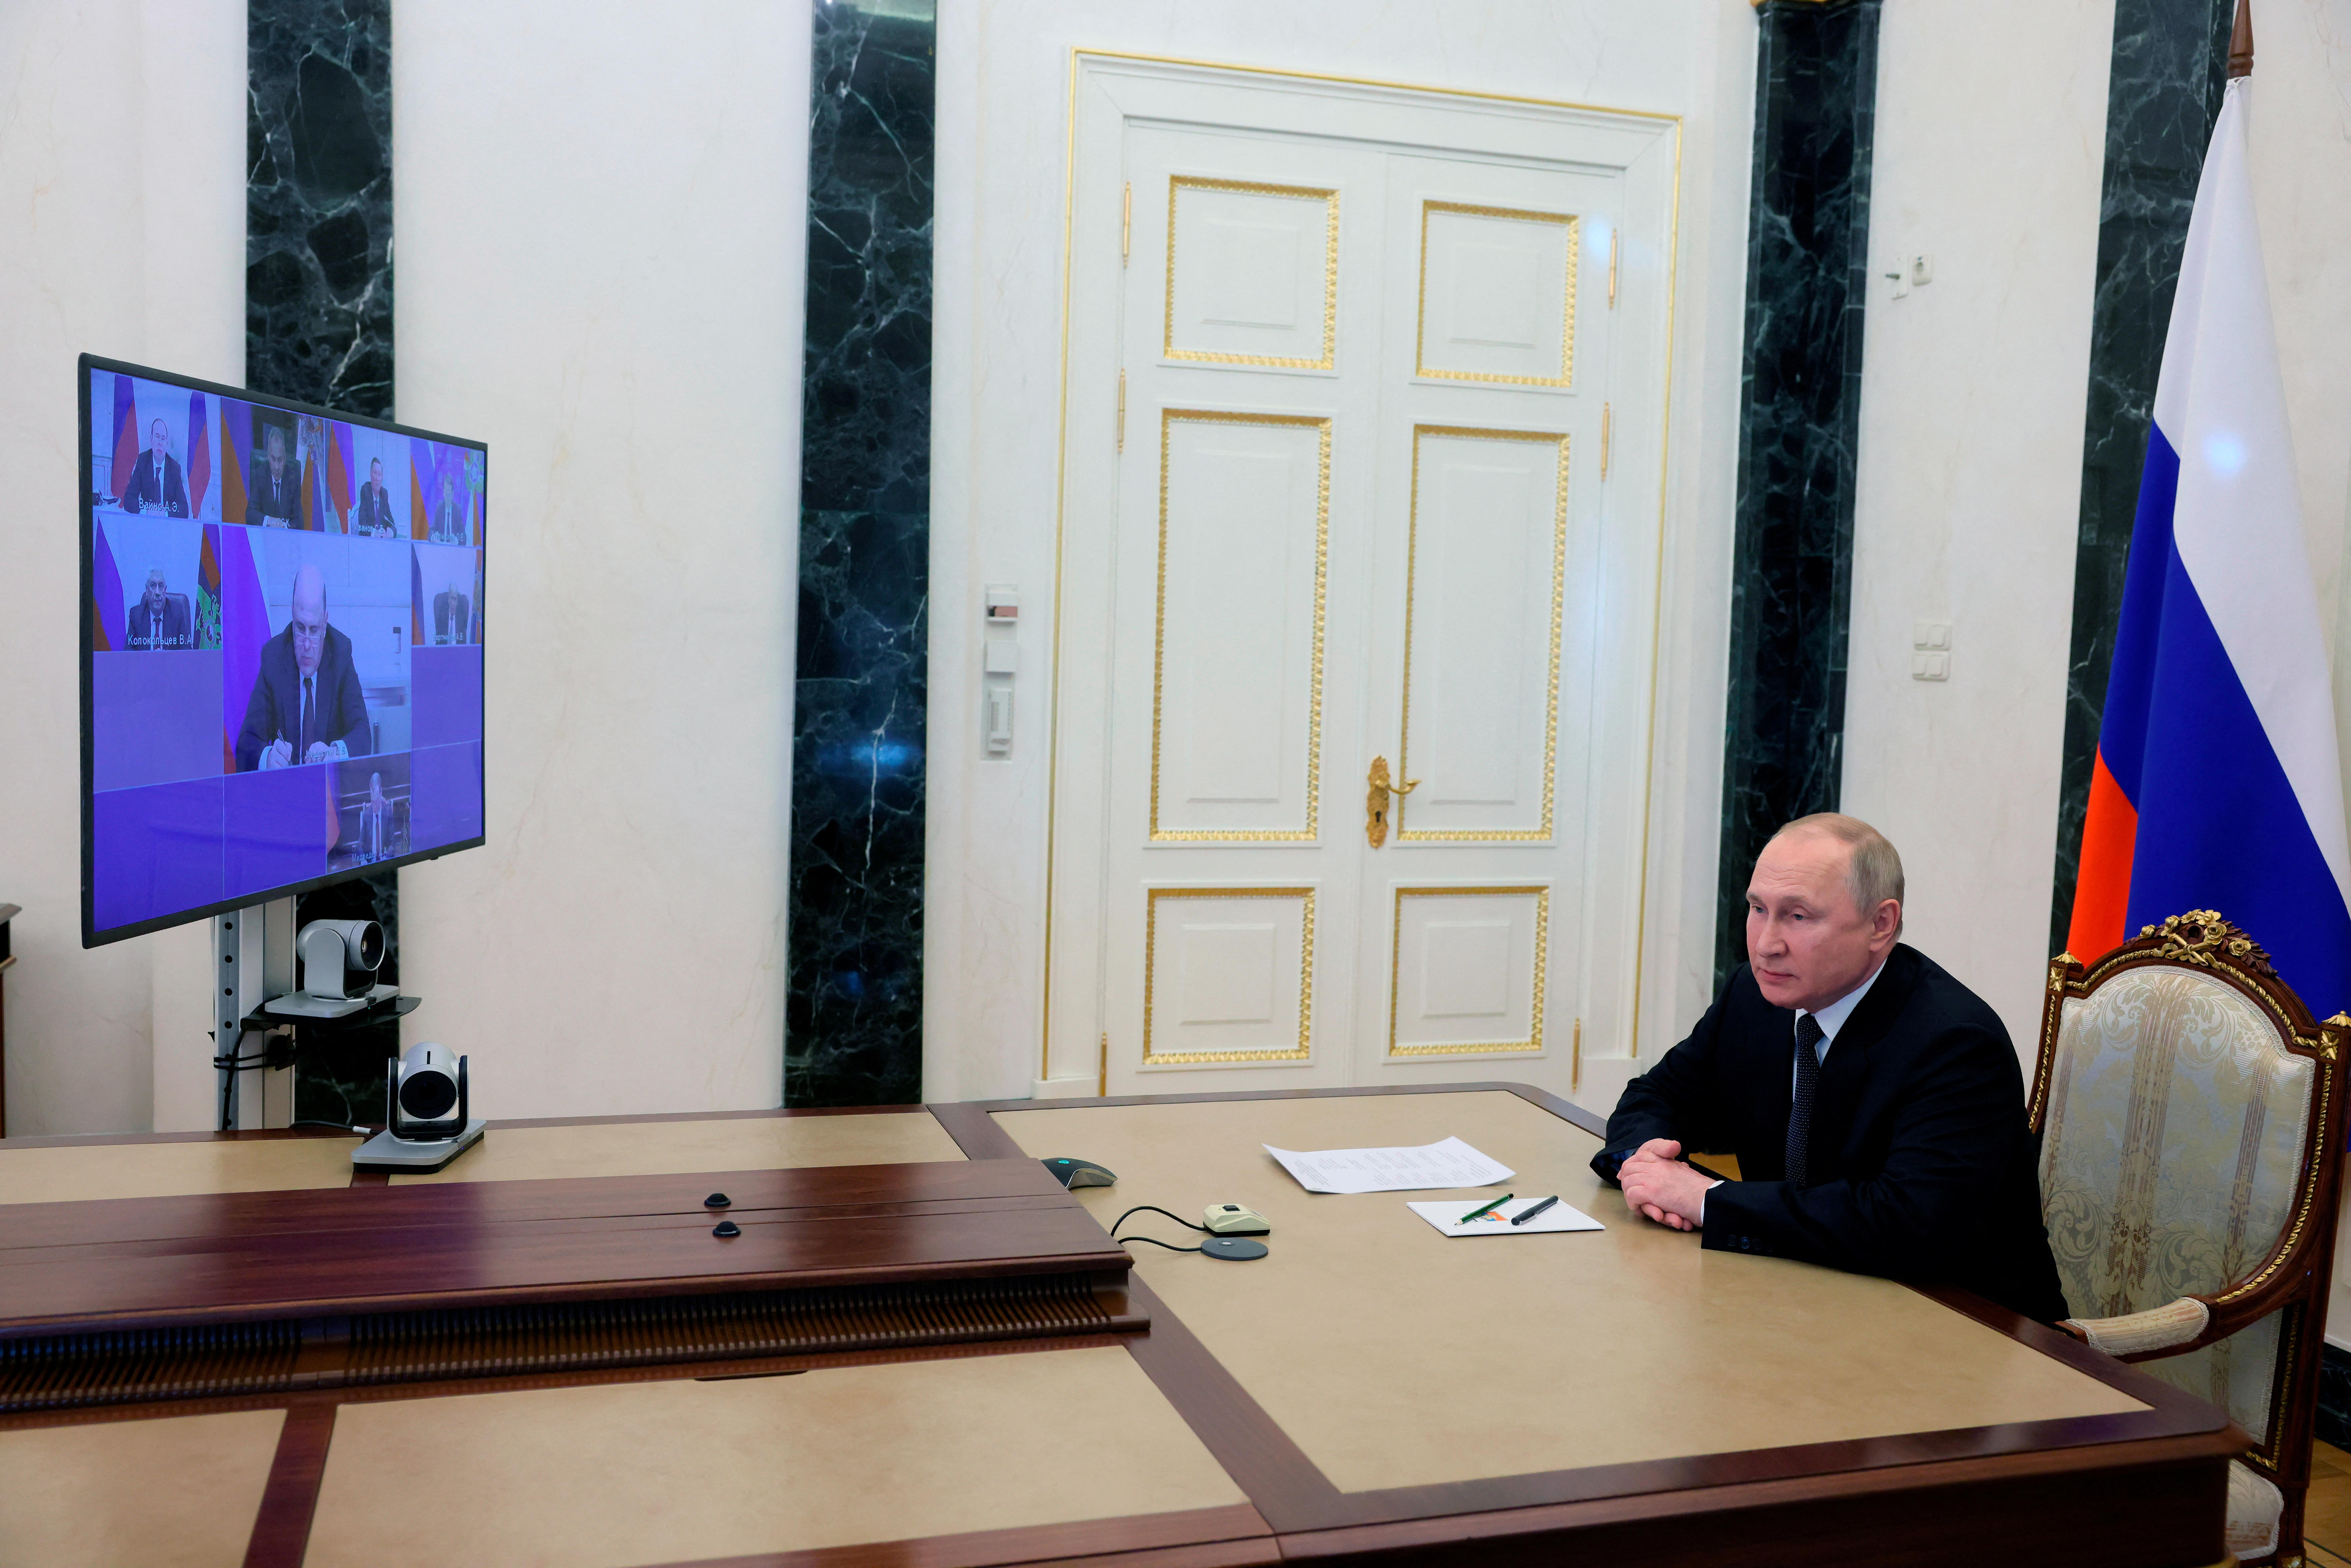 Russian President Putin chairs a meeting with members of the Security Council in Moscow